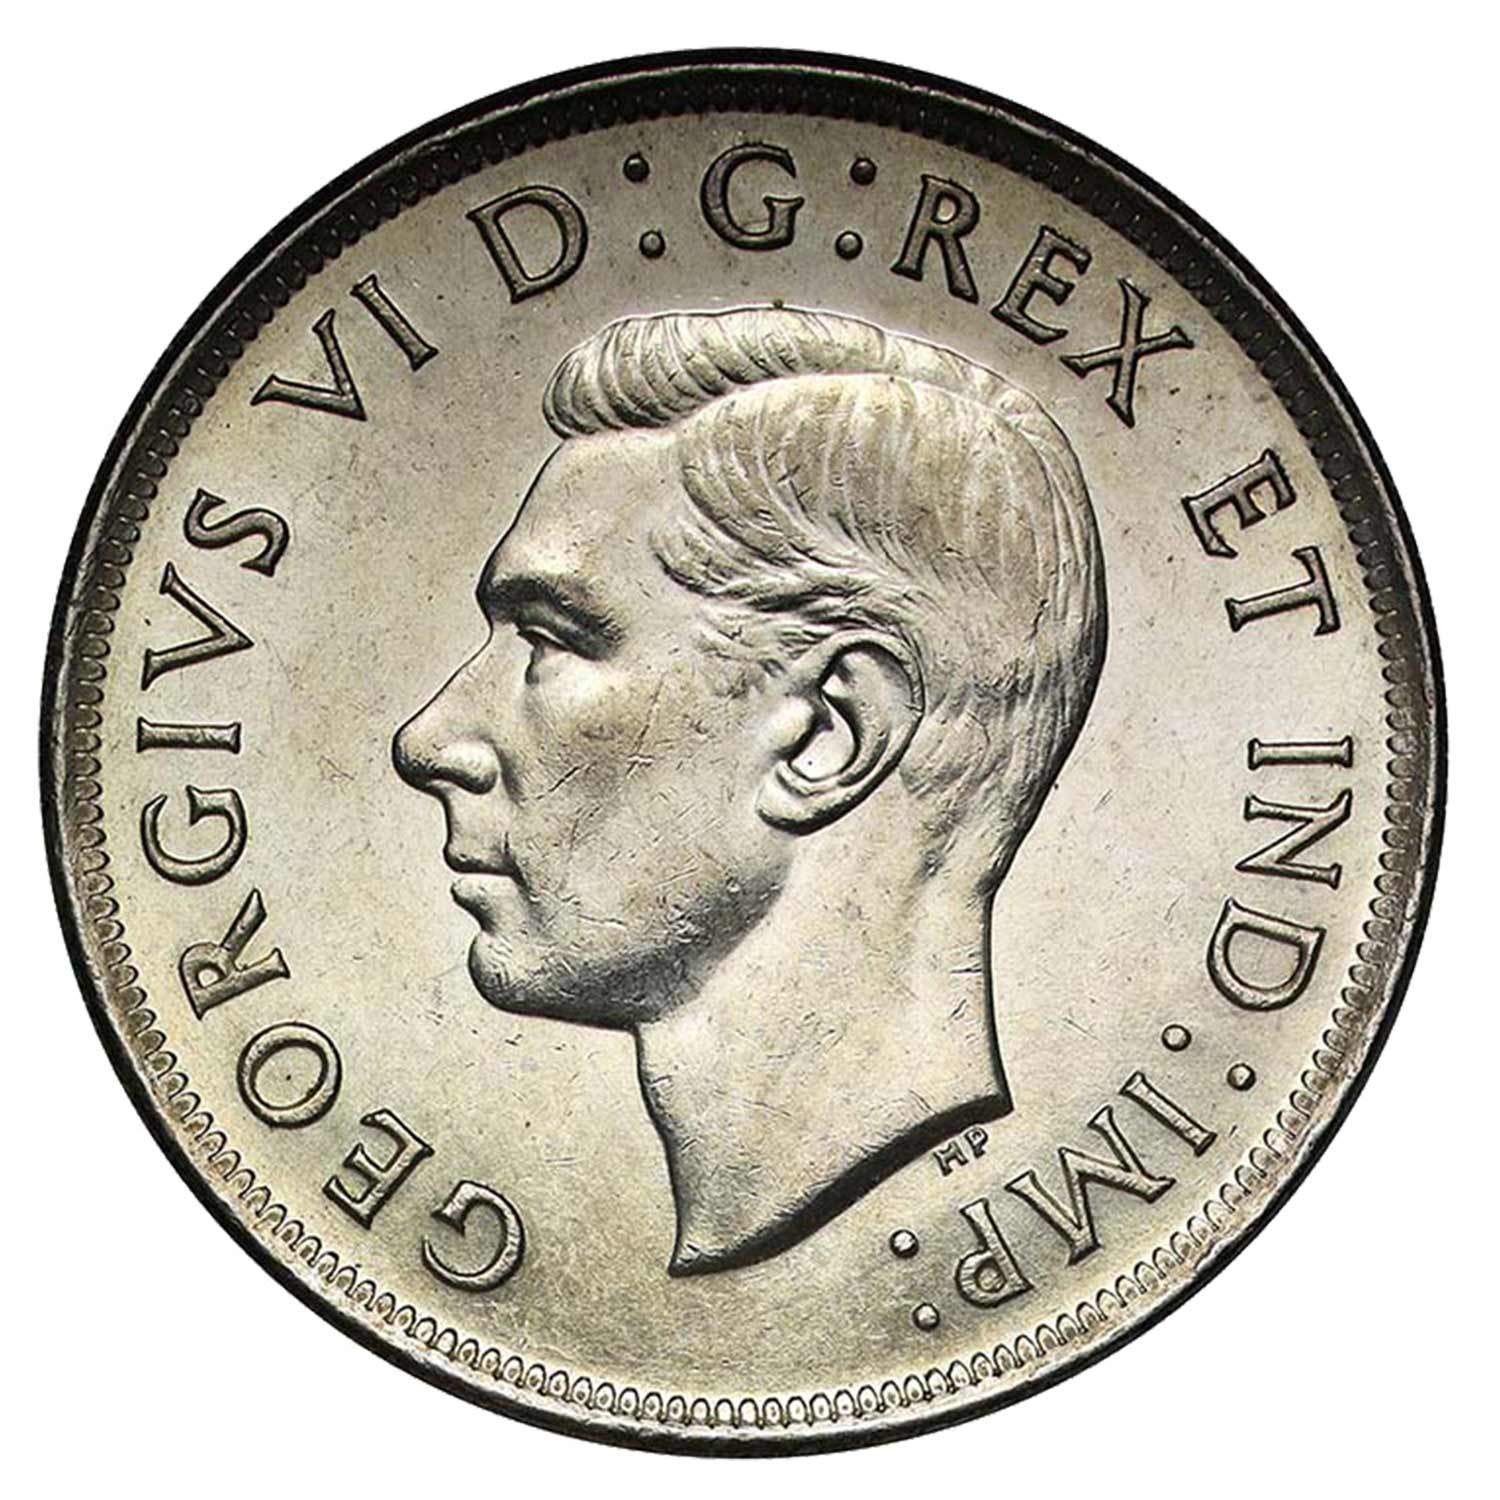 Details about   1939 CANADA Silver Dollar King George VI Coin Nice BRILLIANT UNCIRCULATED KM 38 